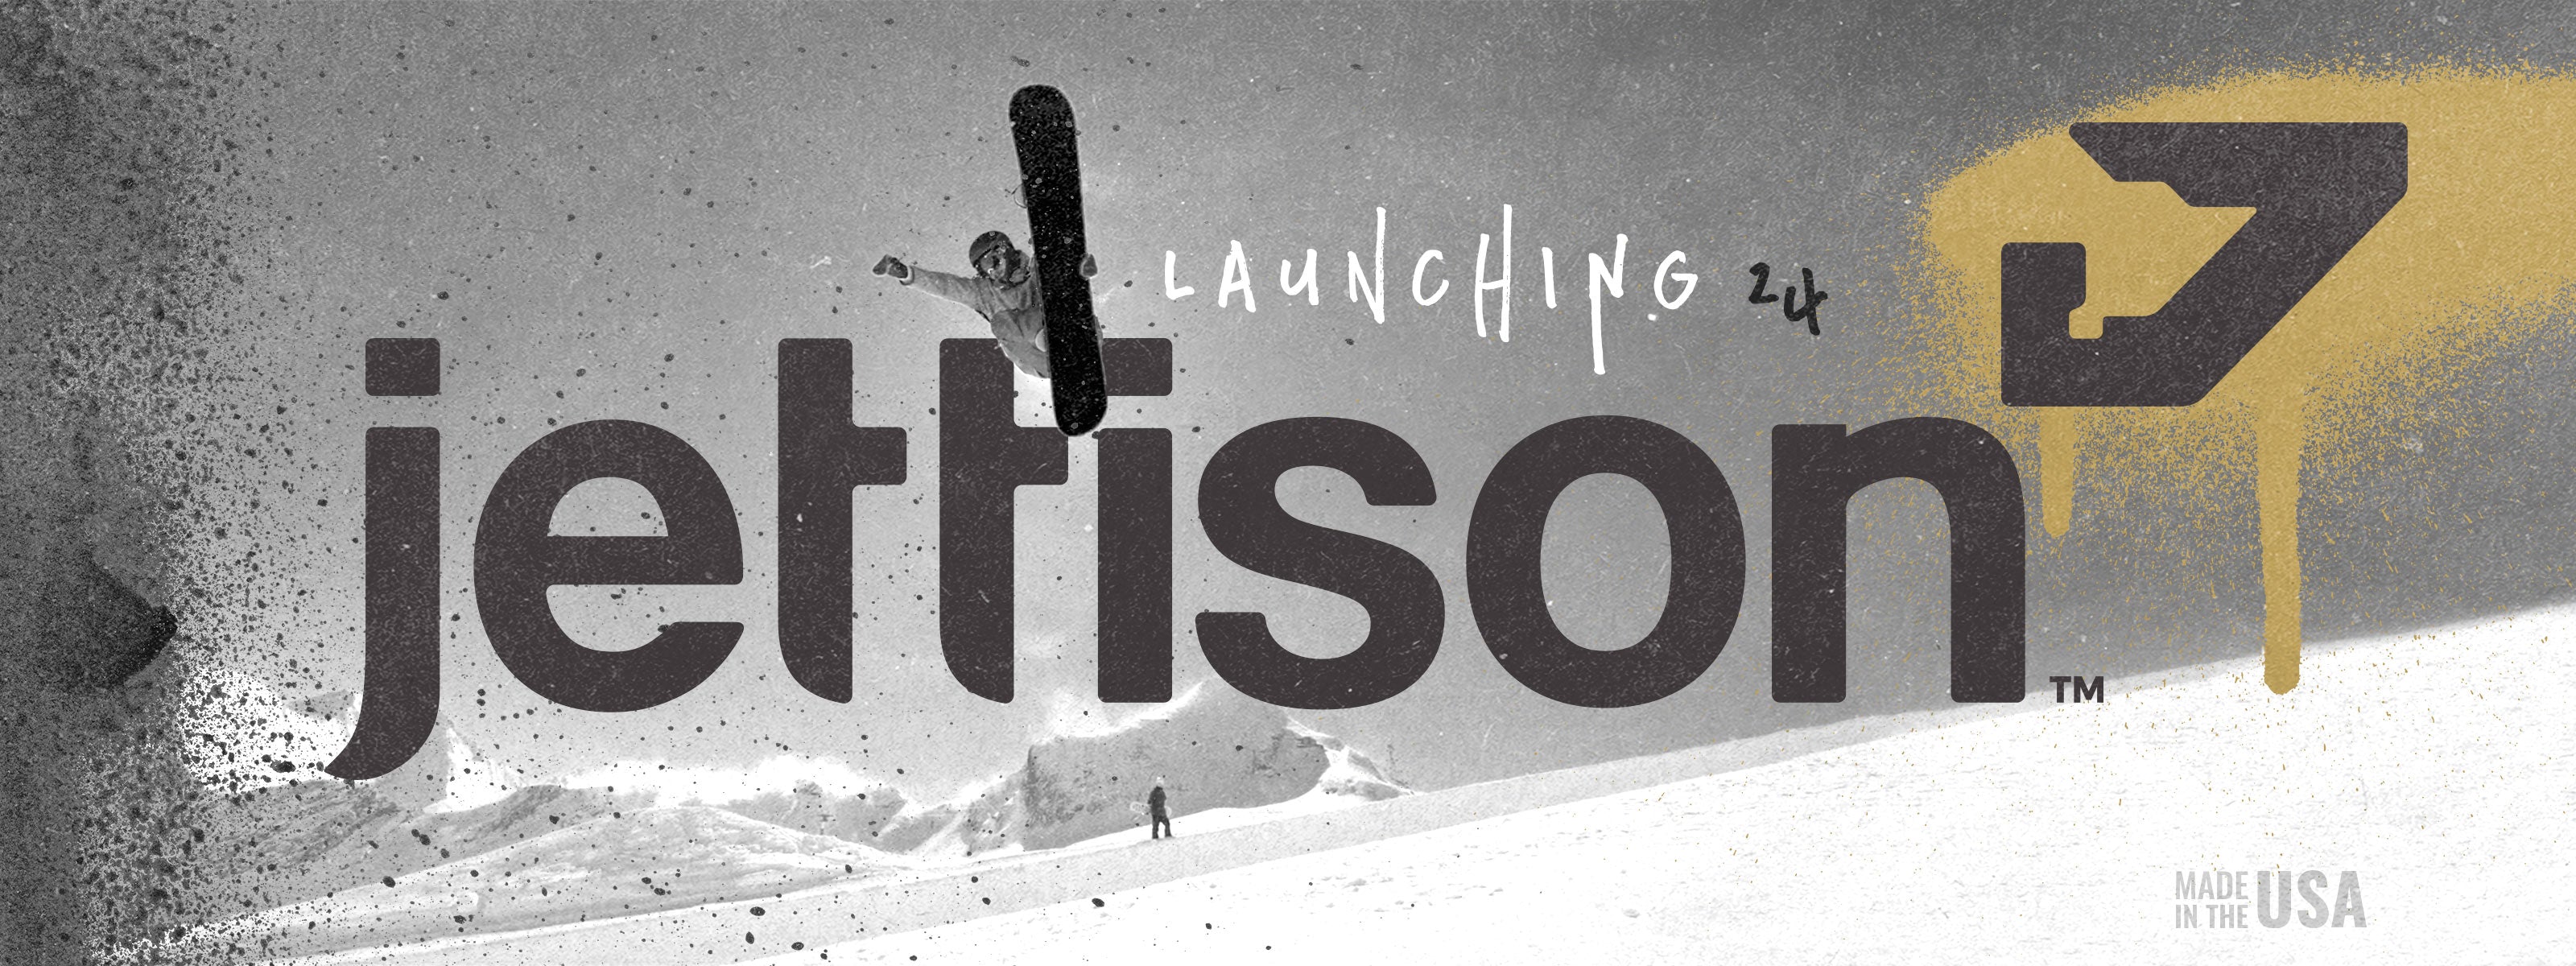 Jettison Equipment - product website launch 2024 - branded image of snowboarder